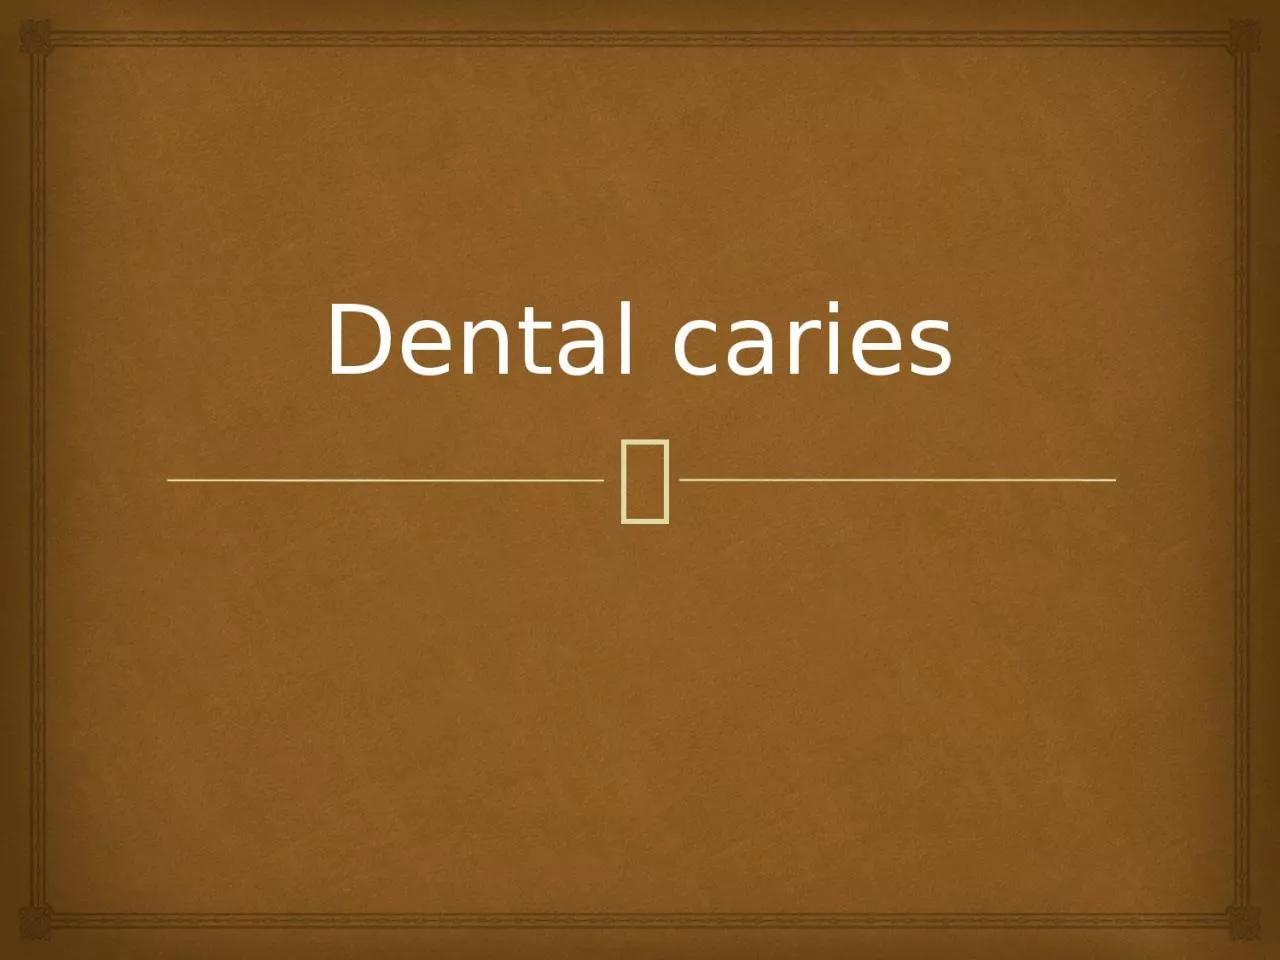 Dental caries dental caries is defined as a microbiological disease of the hard structure